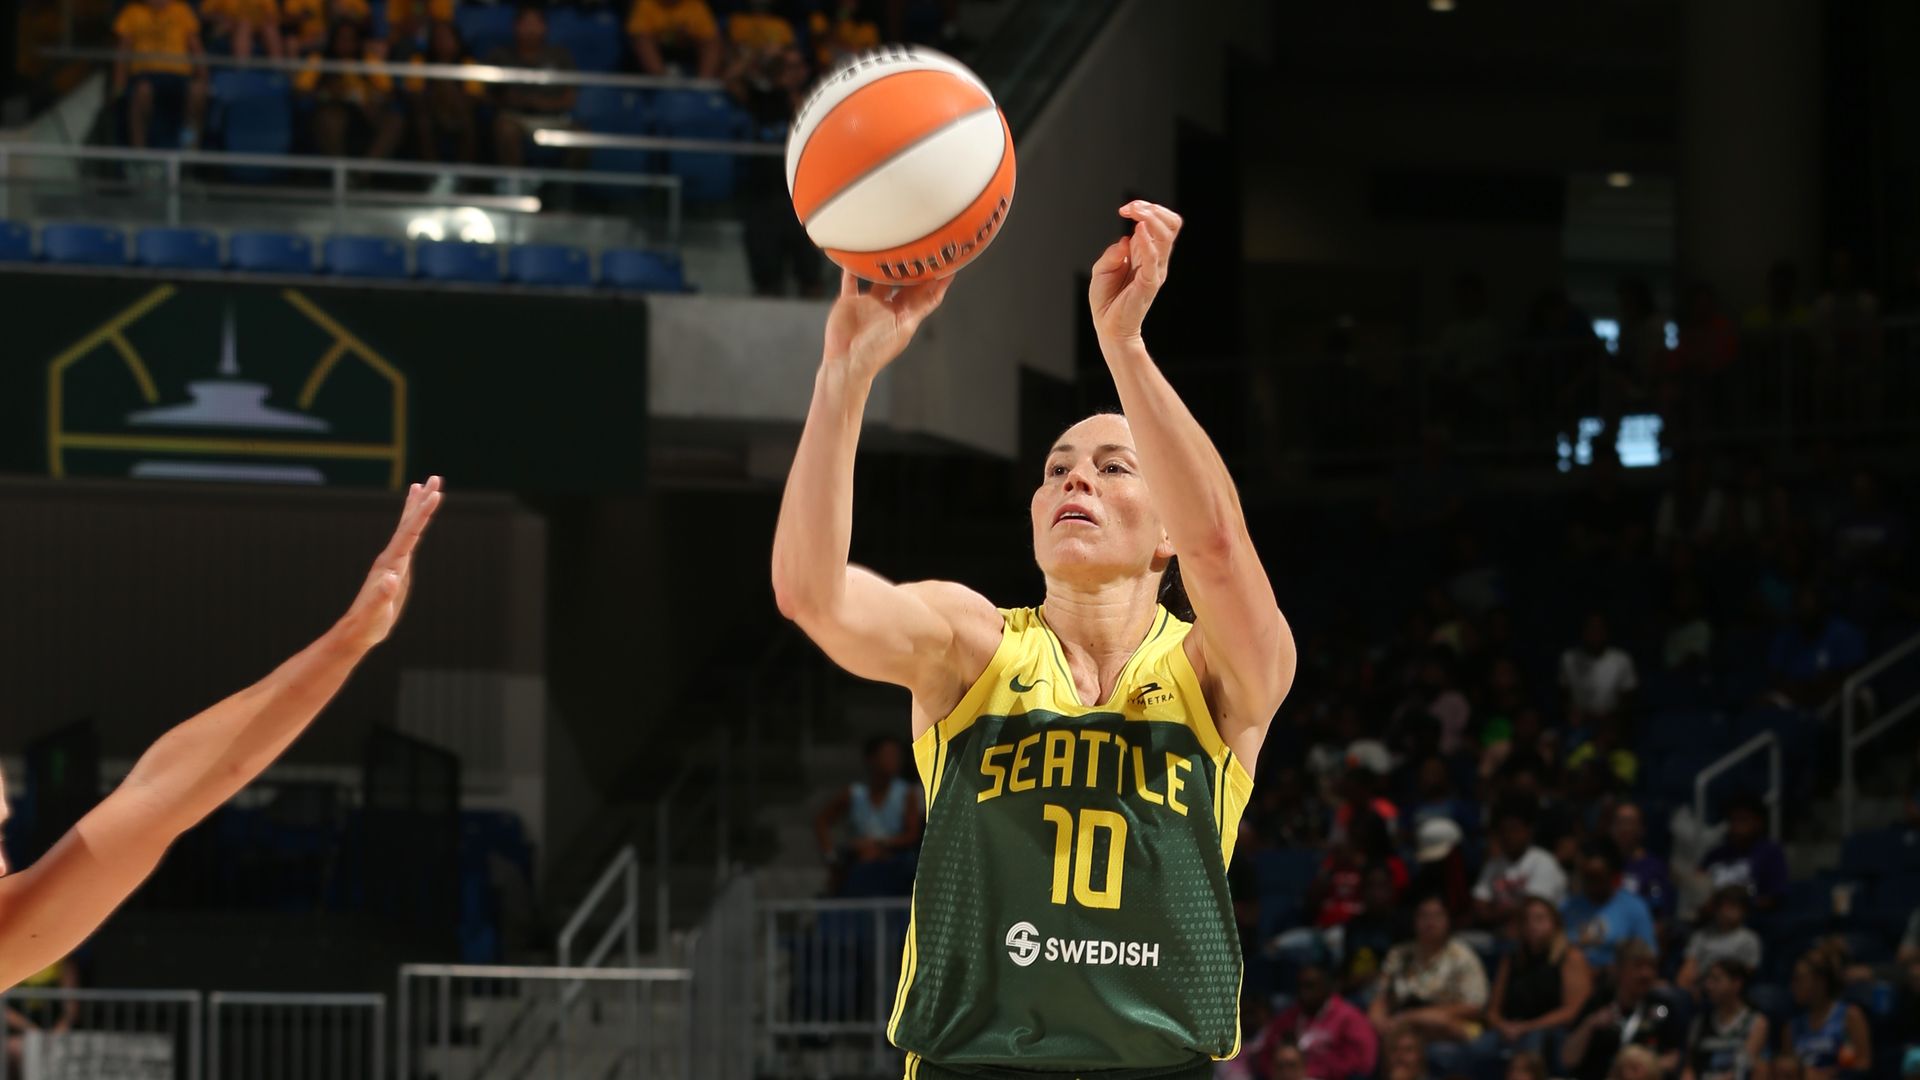 Sue Bird #10 of the Seattle Storm shoots a three point basket during the game against the Chicago Skyon July 20, 2022 at the Wintrust Arena in Chicago, Illinois.